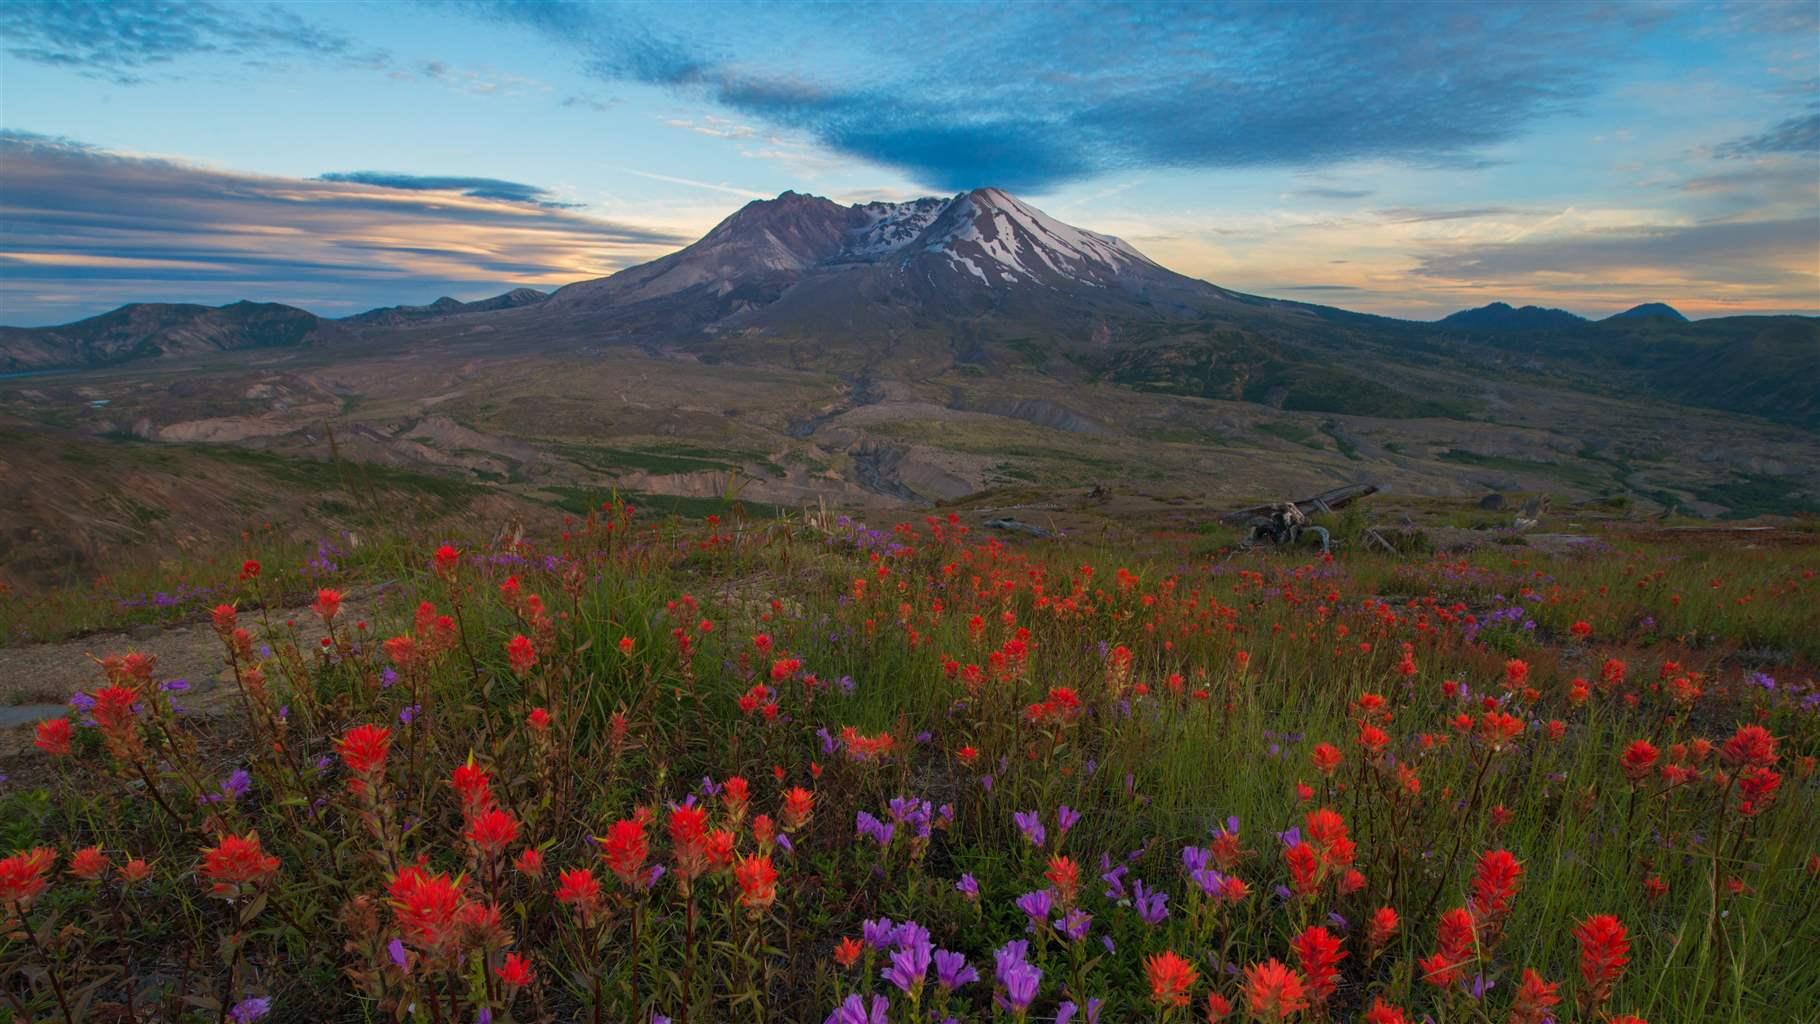 Indian Paintbrush and Penstemon wildflowers and sunset over Mount St. Helens in Washington.